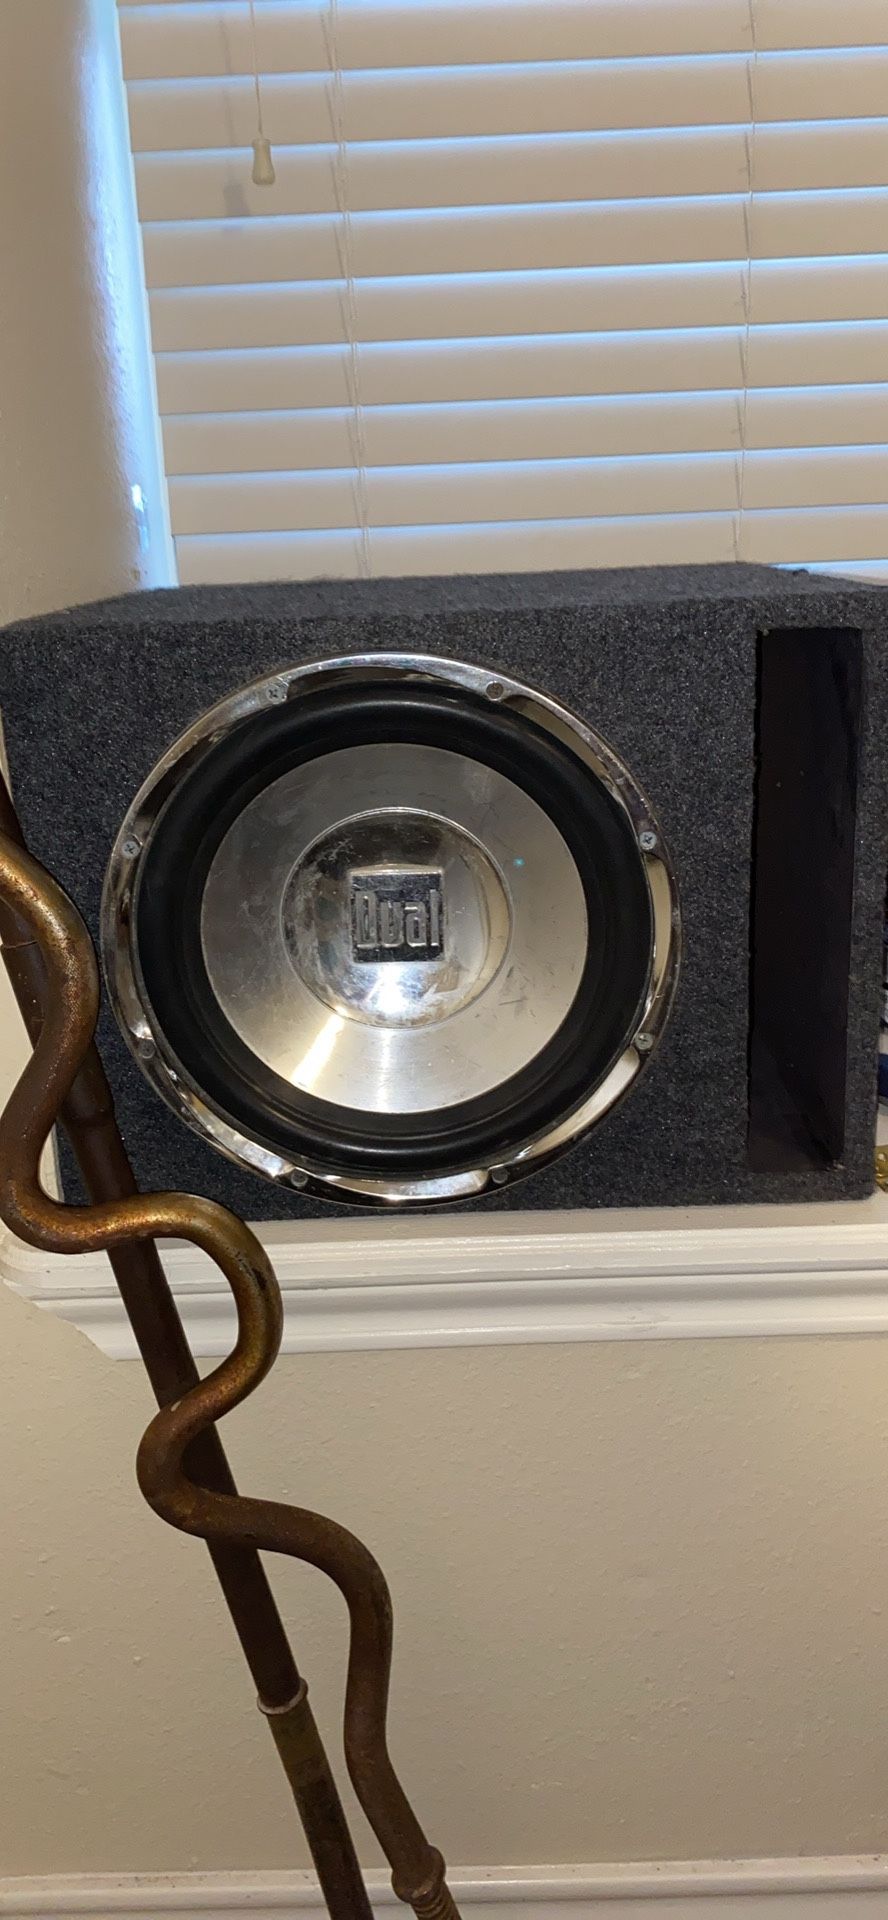 Dual 10” Subwoofer (It Comes With The Box)